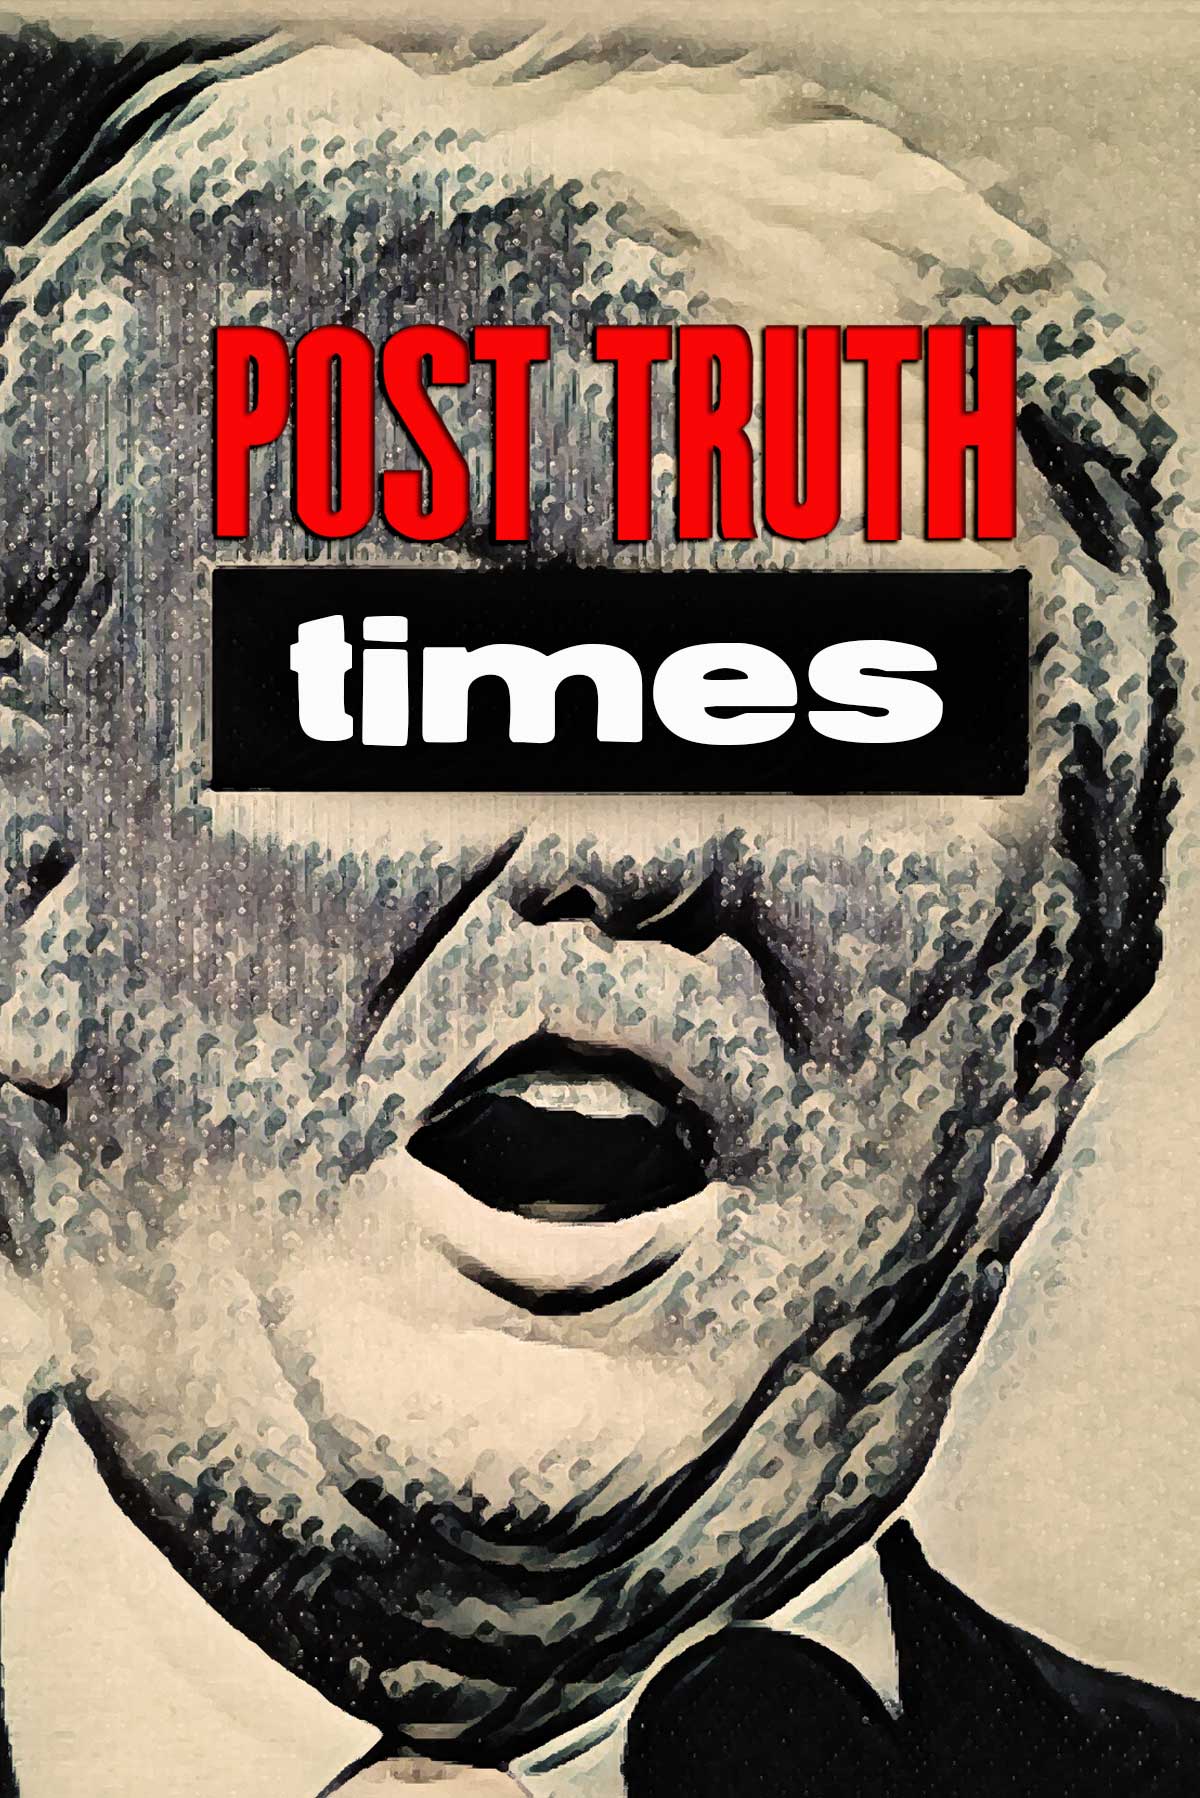 Post Truth Times